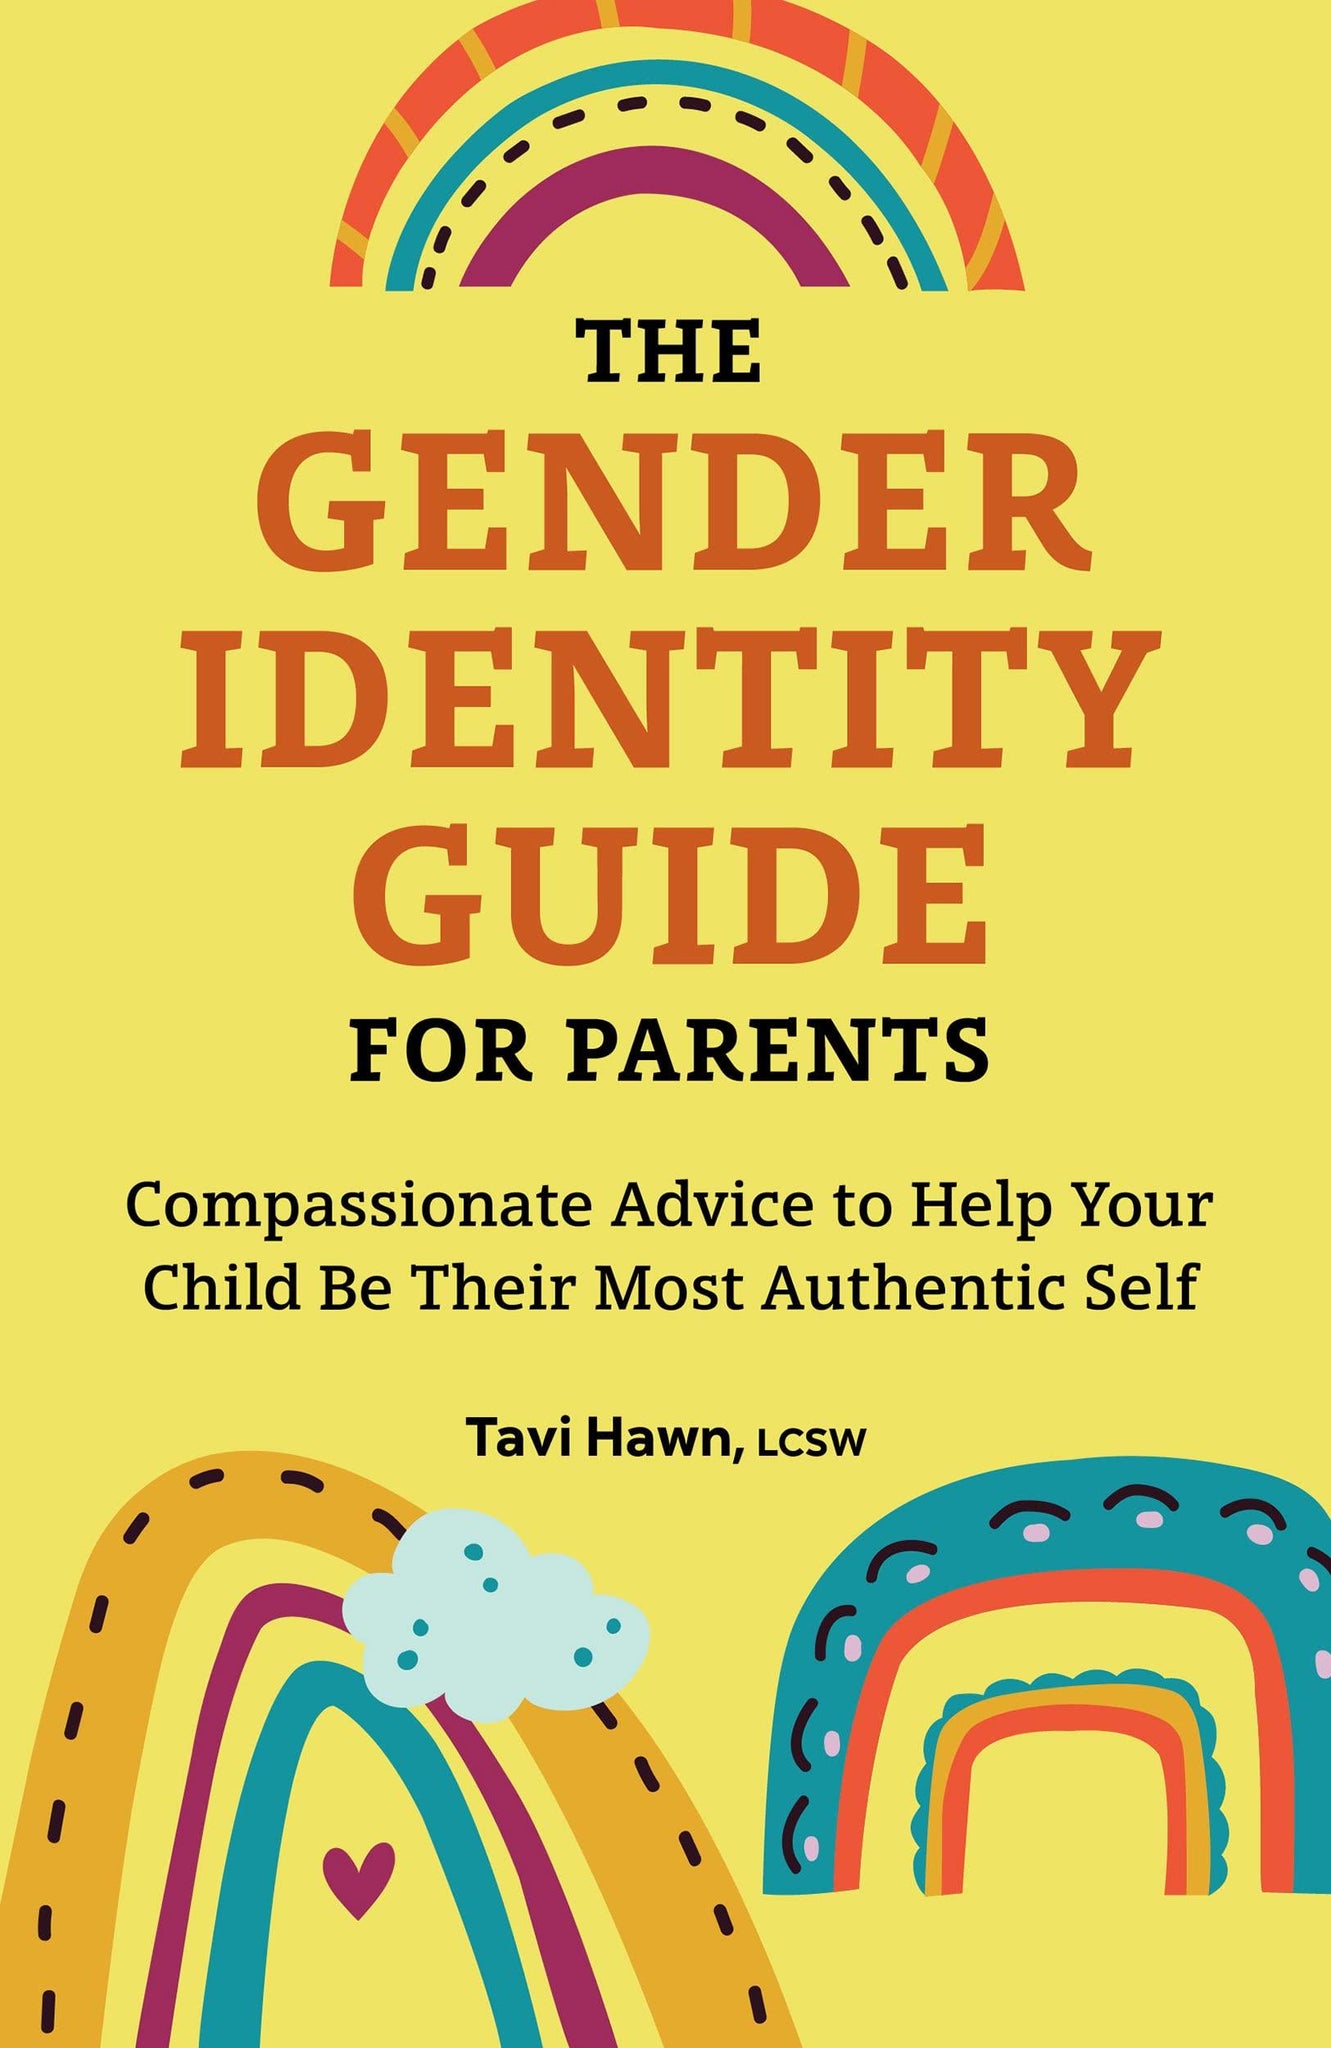 The Gender Identity Guide for Parents: Compassionate Advice to Help Your Child Be Their Most Authentic Self - ShopQueer.co